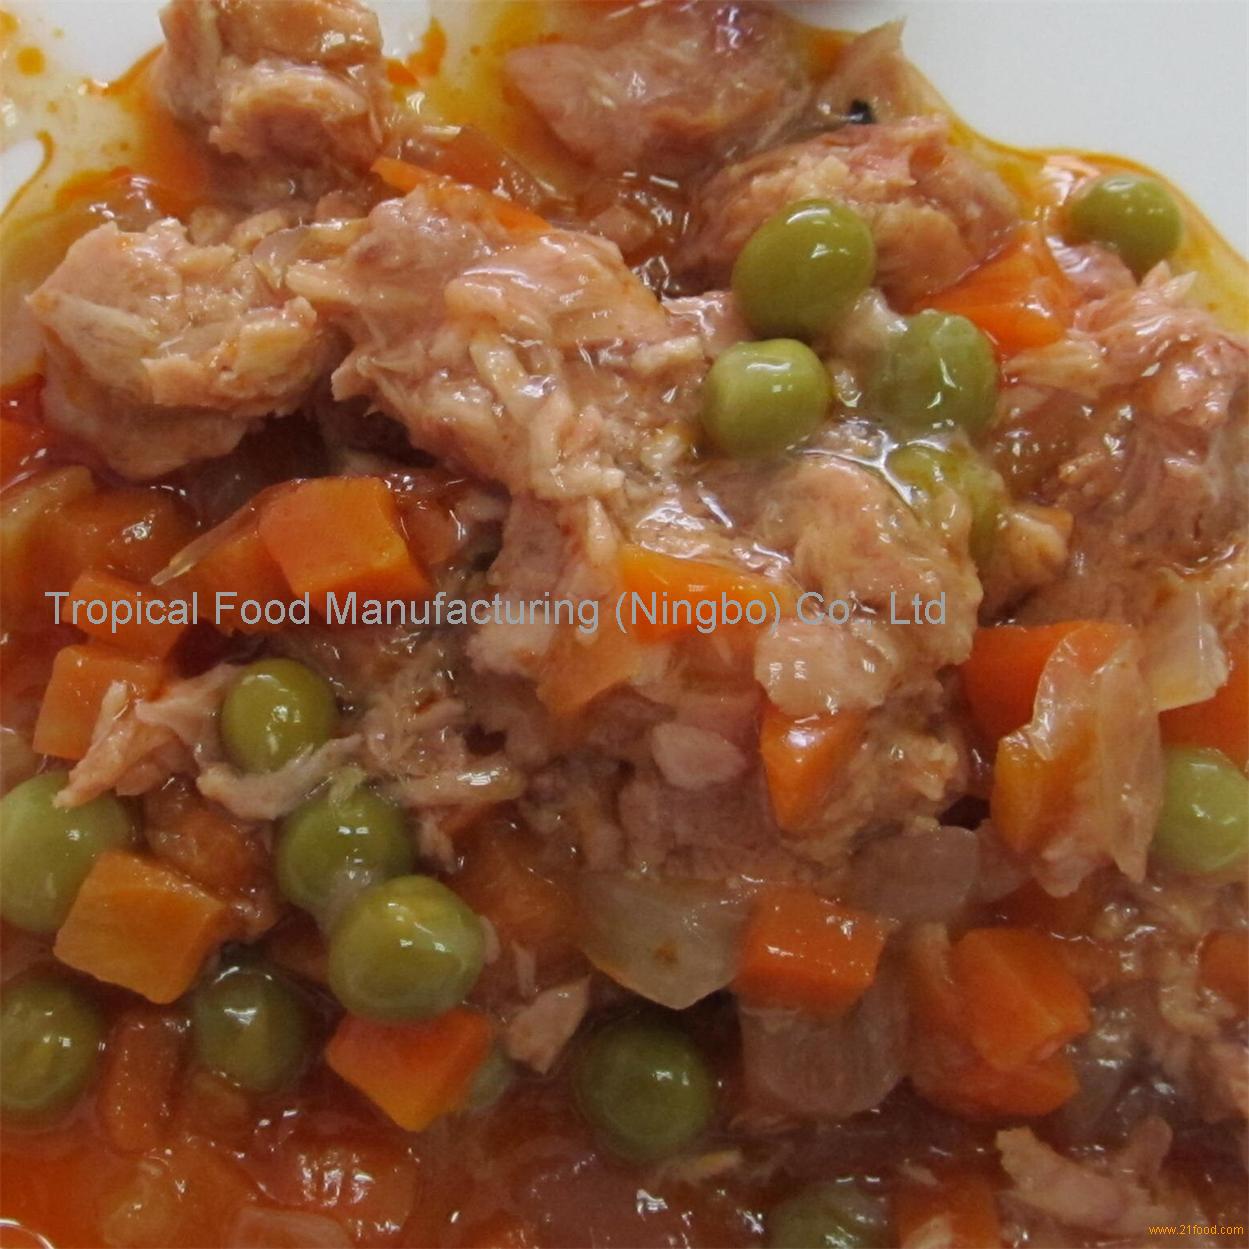 Canned Mackerel in Tomato Sauce with Vegetables (onion, carrot, beans)160g